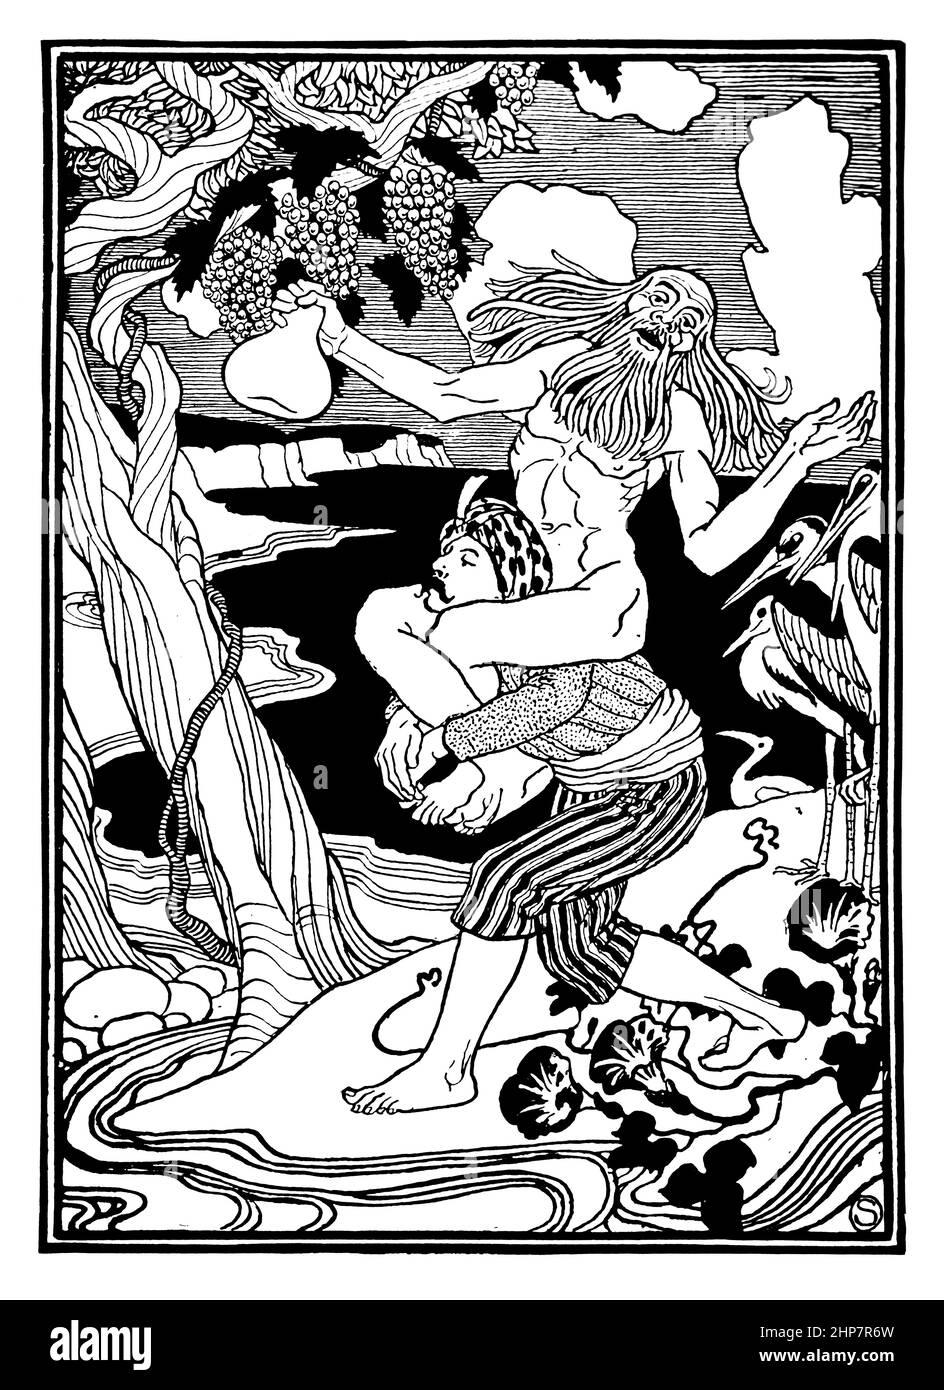 Sinbad in turban carying naked old bearded man 1890 illustration by William Strang: from Sindbad the Sailor and Ali Baba and the Forty Thieves publish Stock Photo